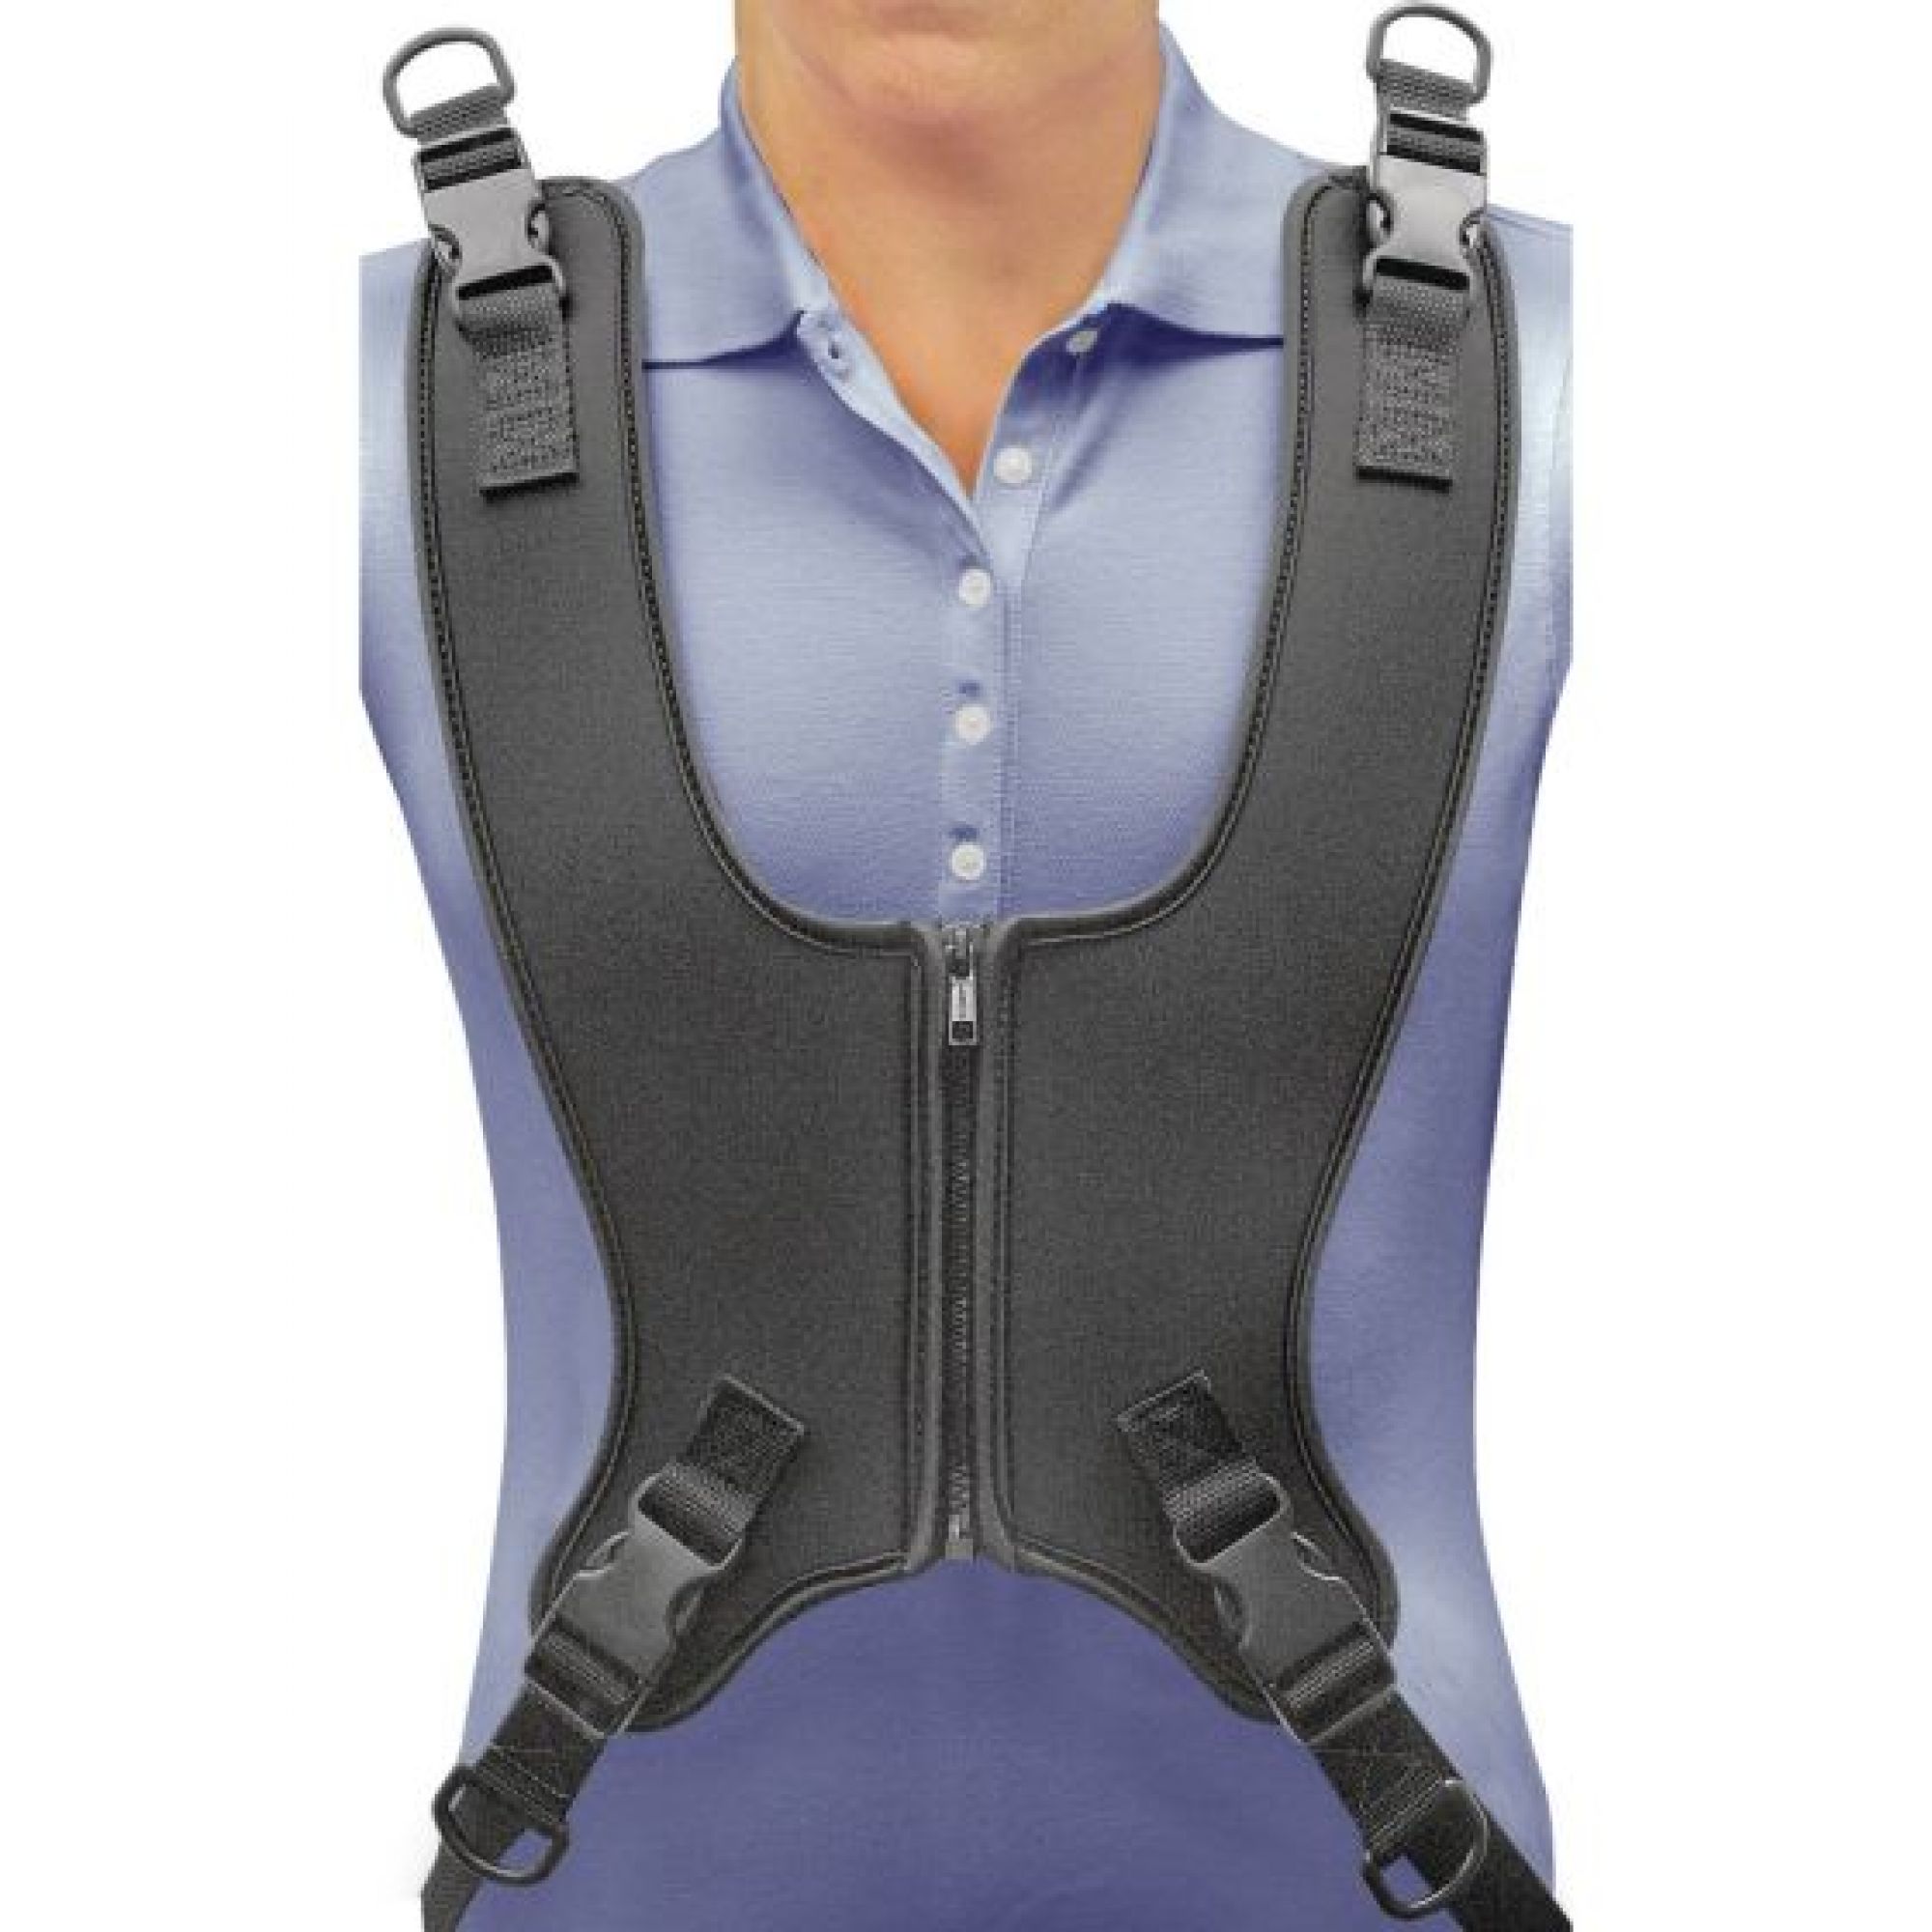 Corrective support corset - vest with hooks, zipper and shoulder straps -  . Gift Ideas